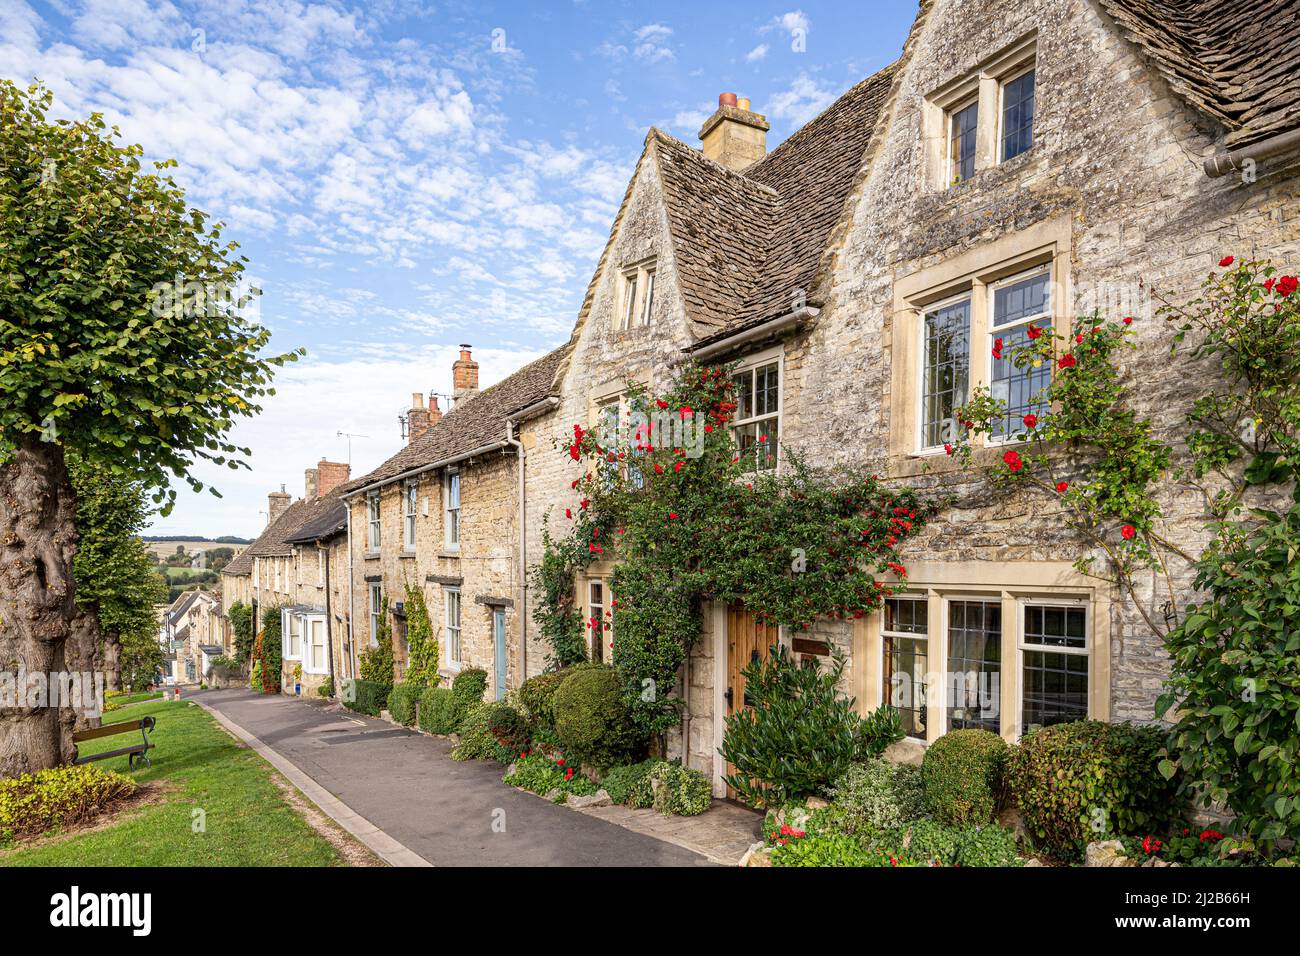 Typical traditional stone buildings on The Hill in the Cotswold town of Burford, Oxfordshire, England UK Stock Photo